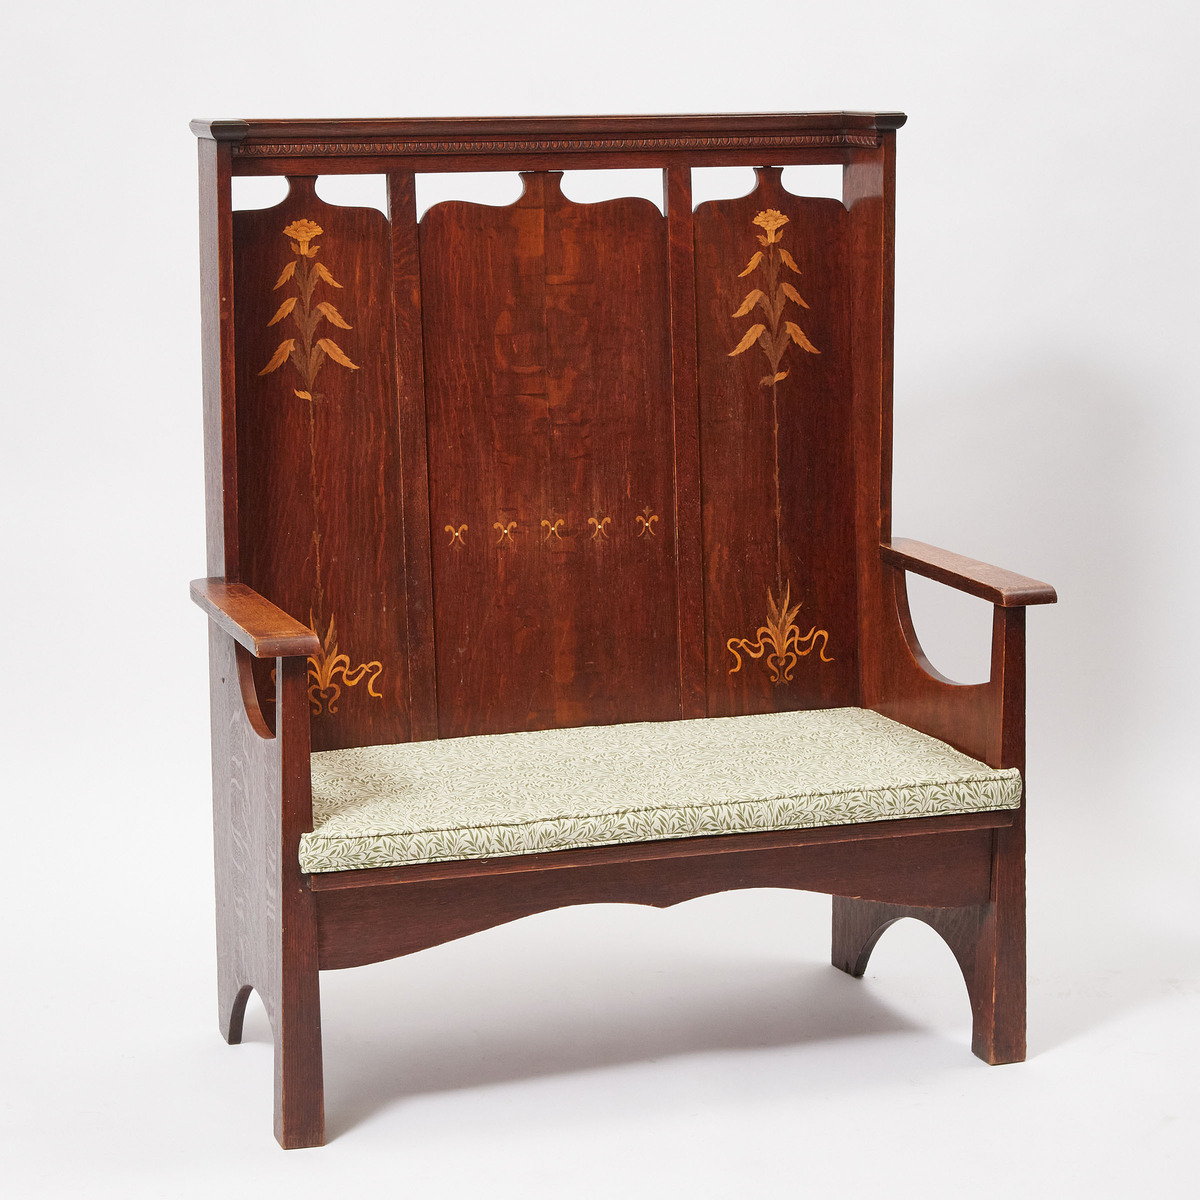 Arts and Crafts Inlaid Oak High Back Settle Attributed to Stickley Brothers, early 20th century